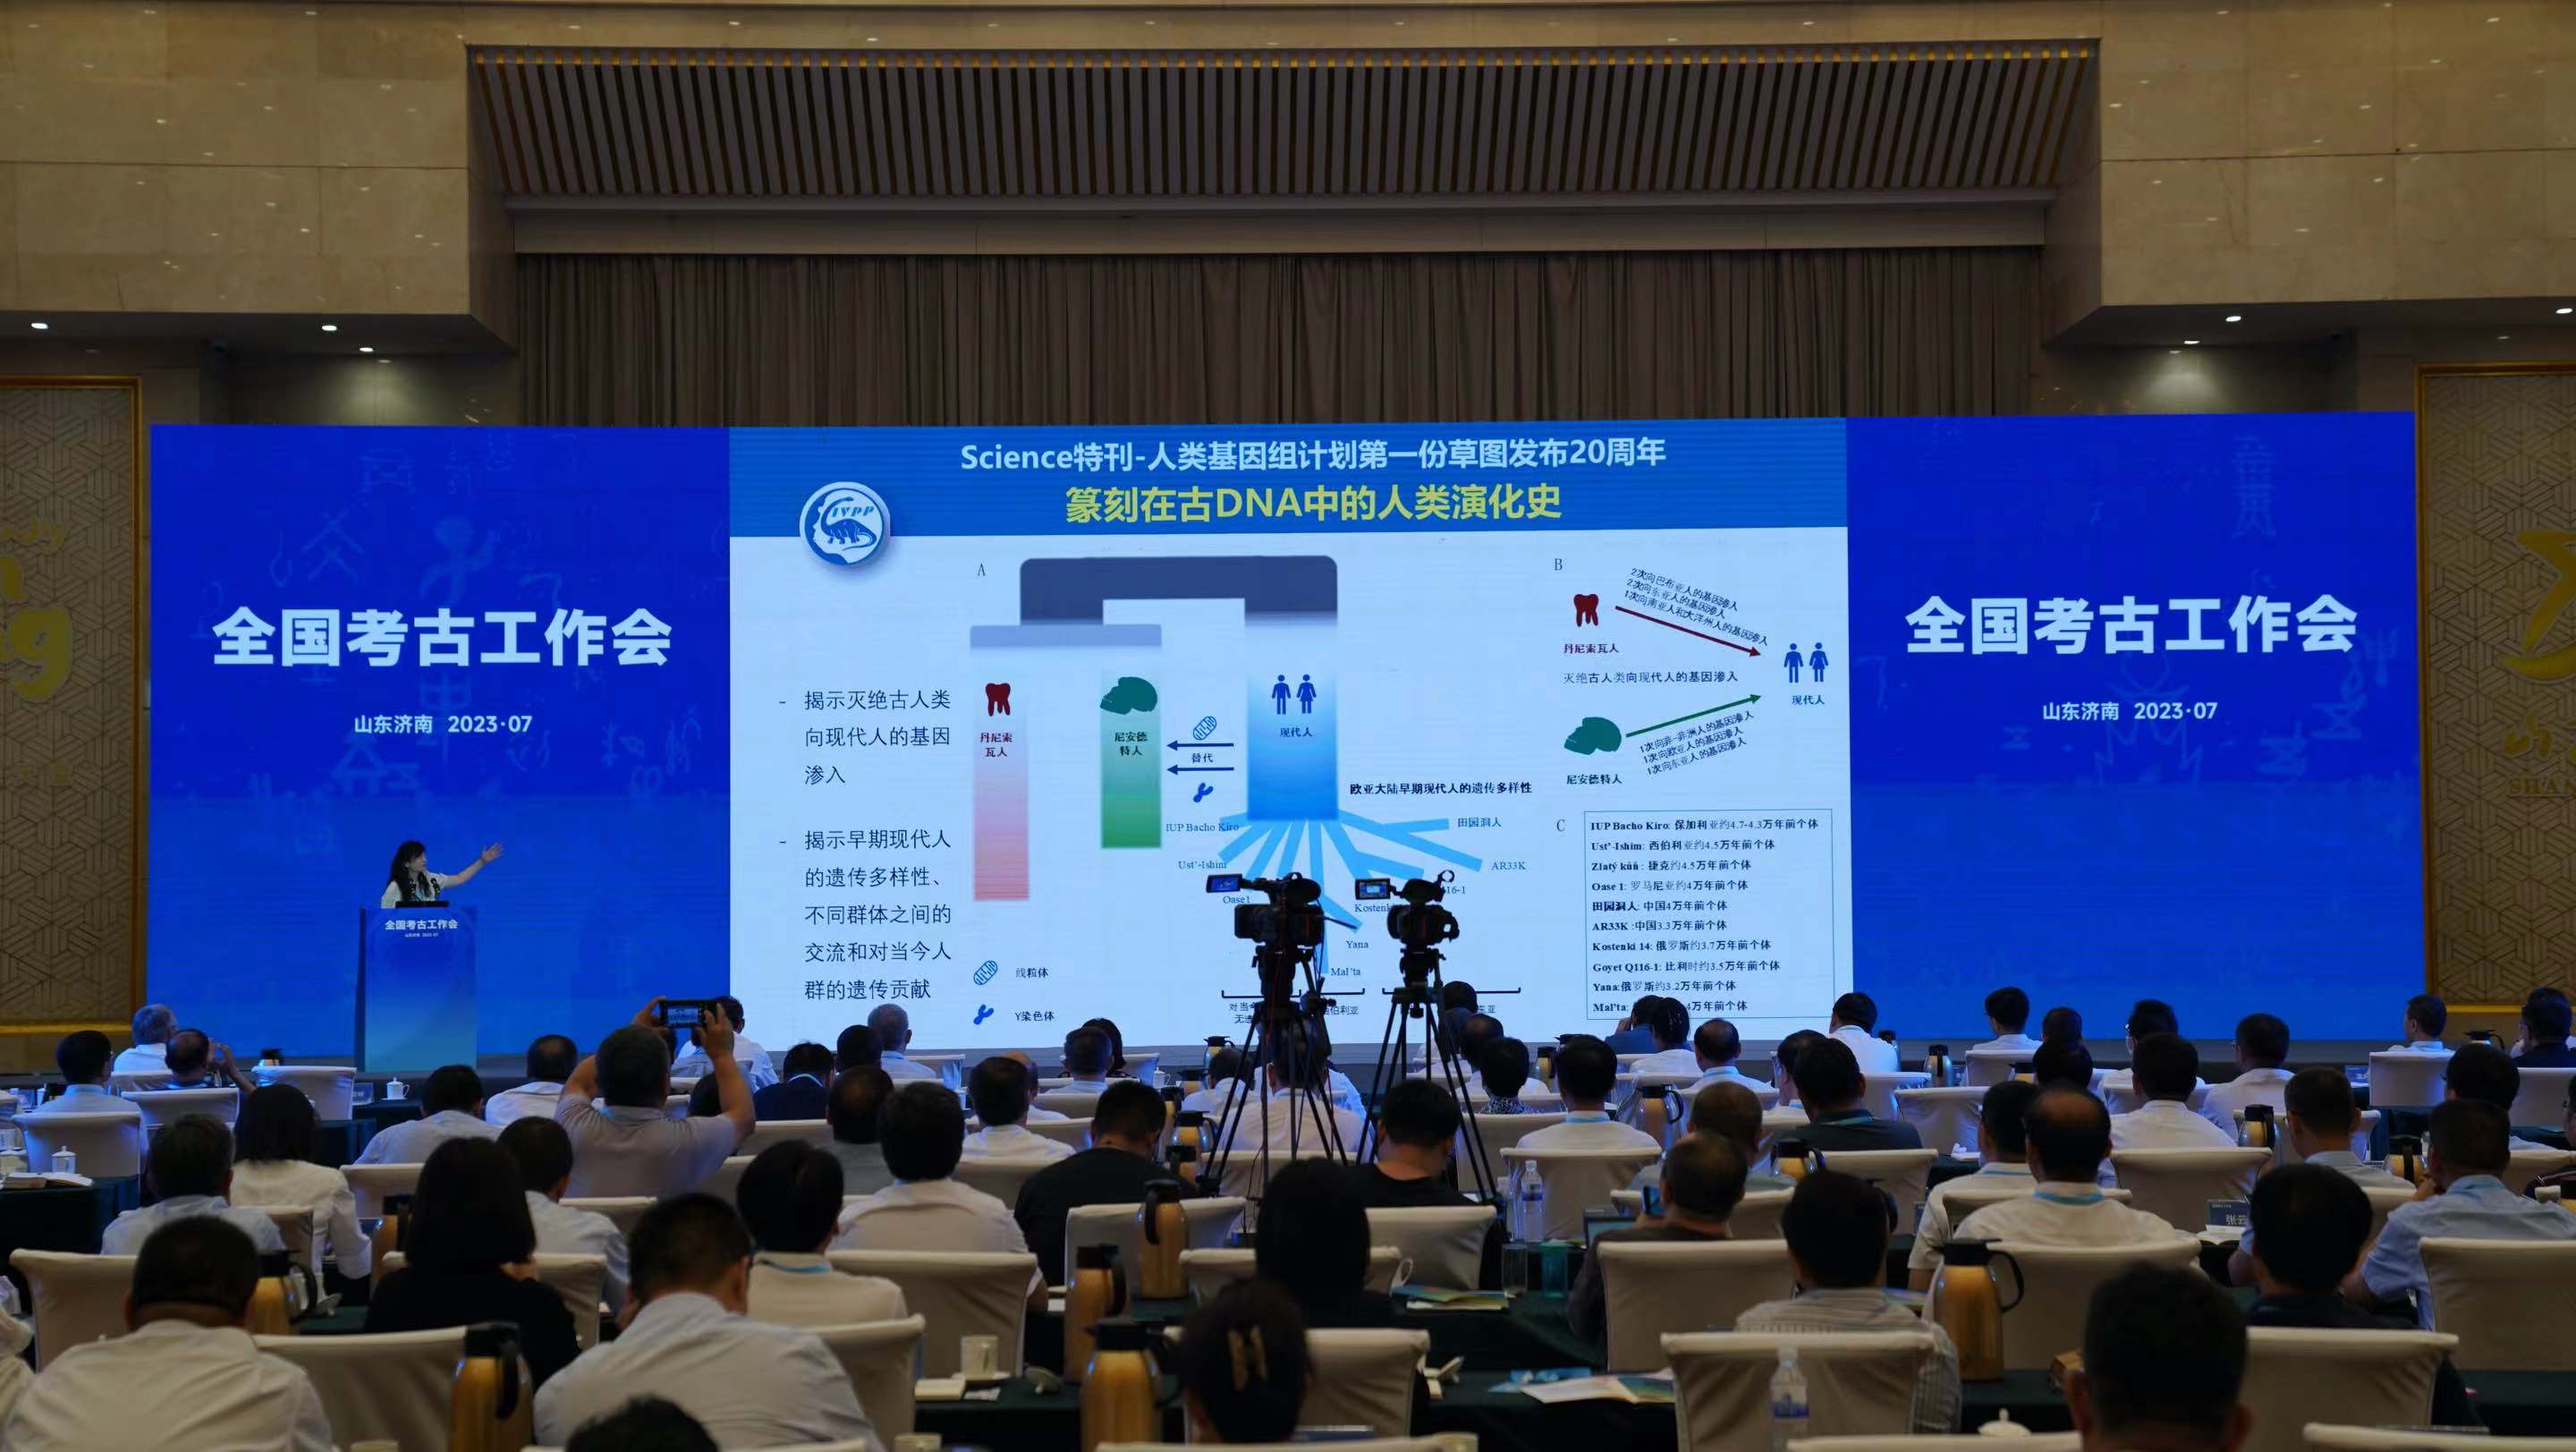 The conference is being held at an important stage when Chinese archaeology has entered a new century at a critical period when the 14th Five-Year Plan plan was laid out. /CGTN